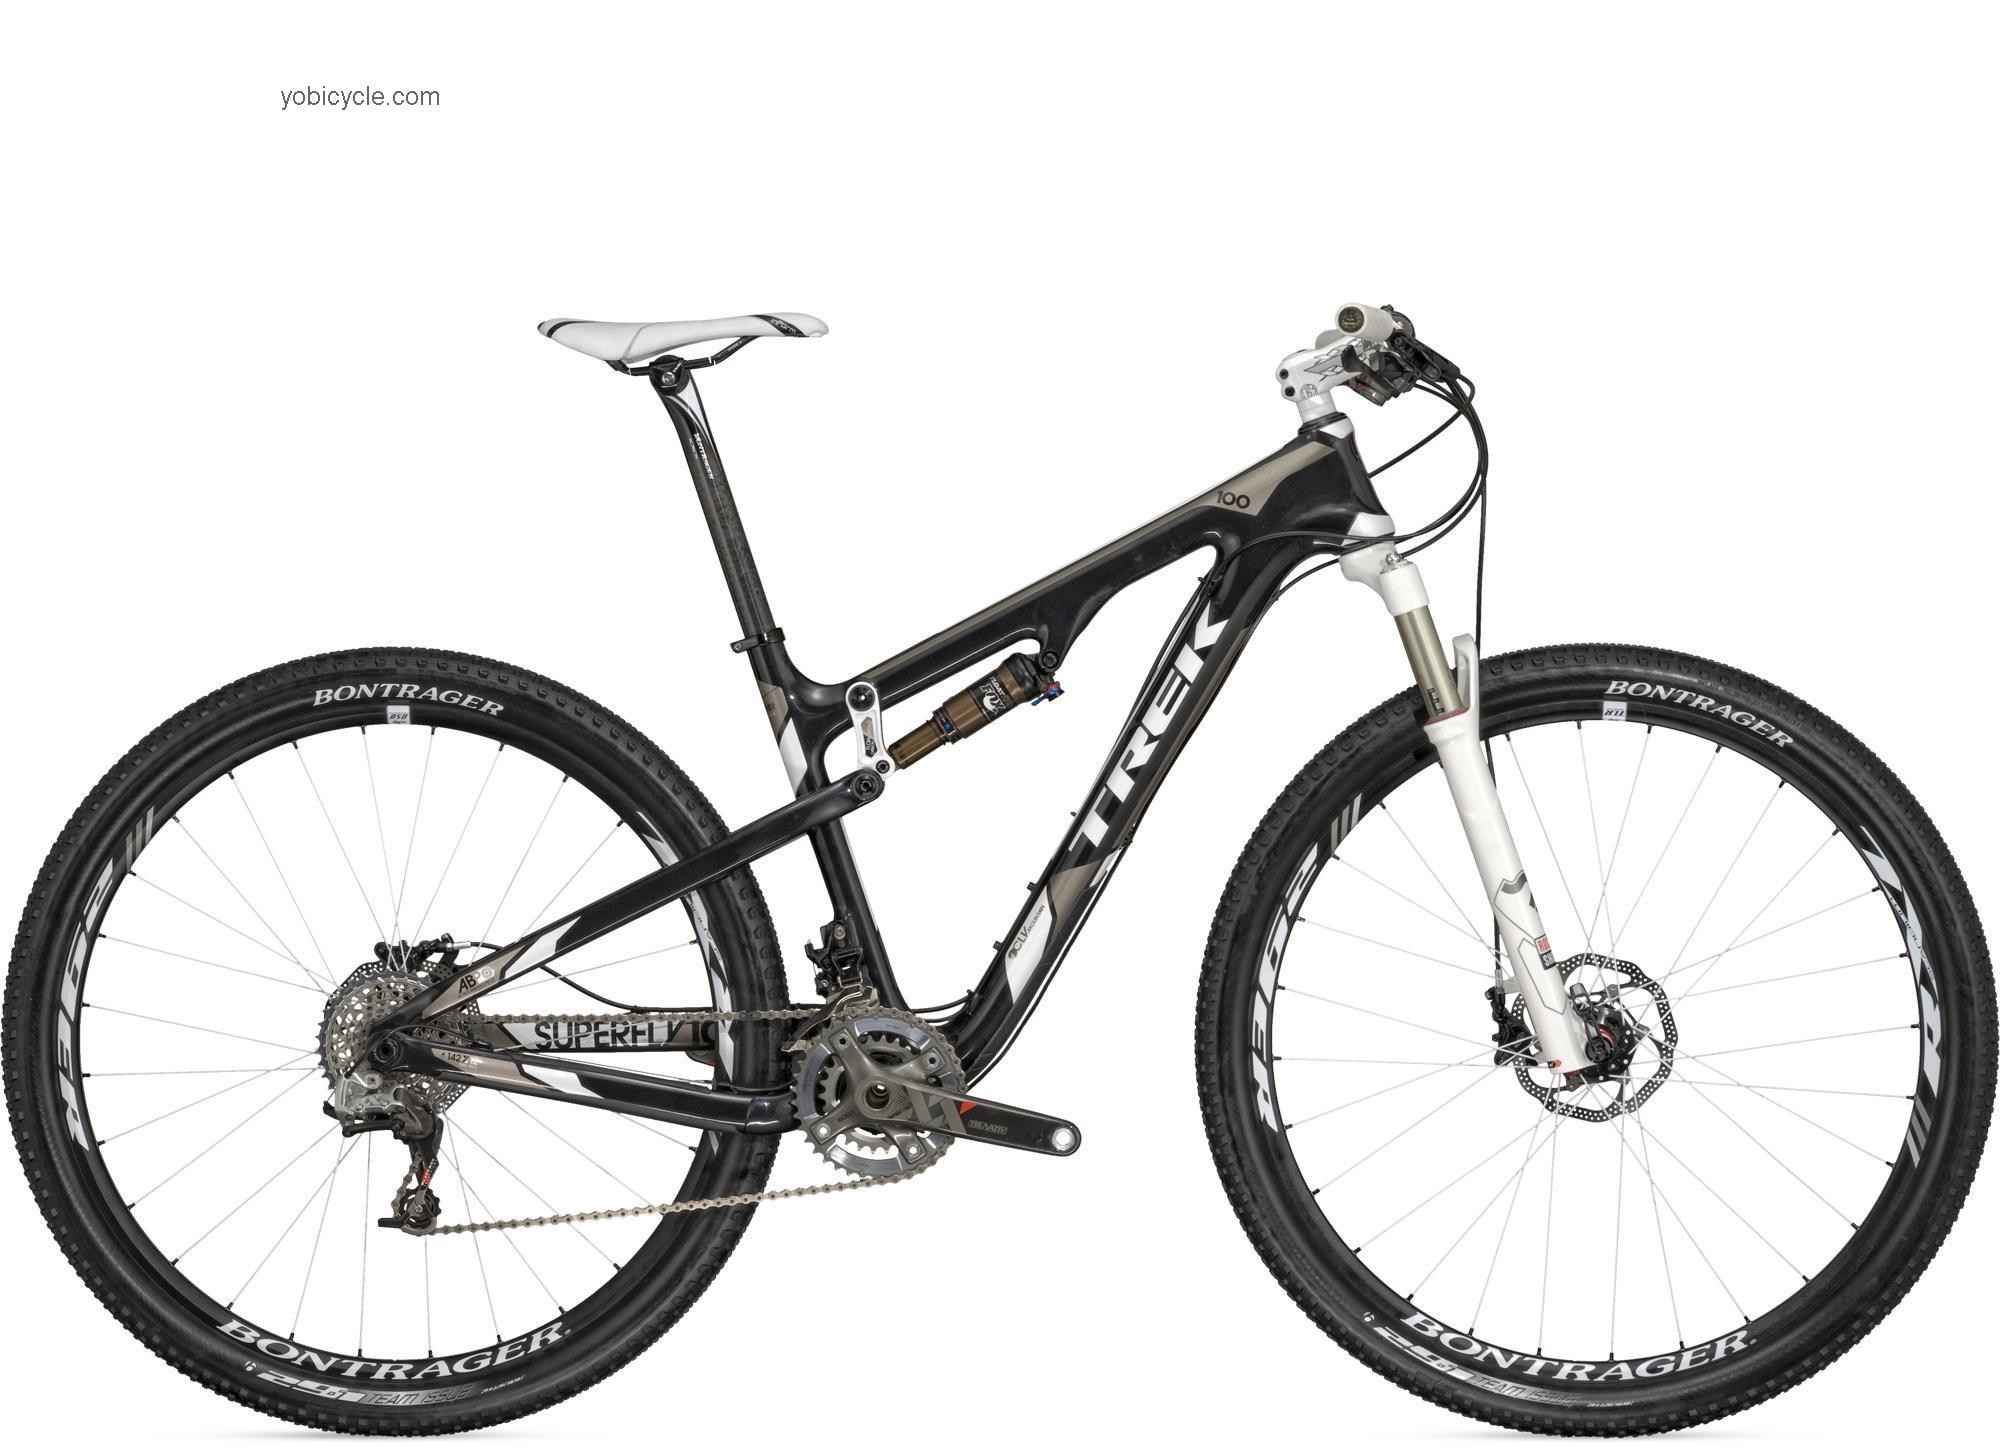 Trek Superfly 100 Pro 2012 comparison online with competitors